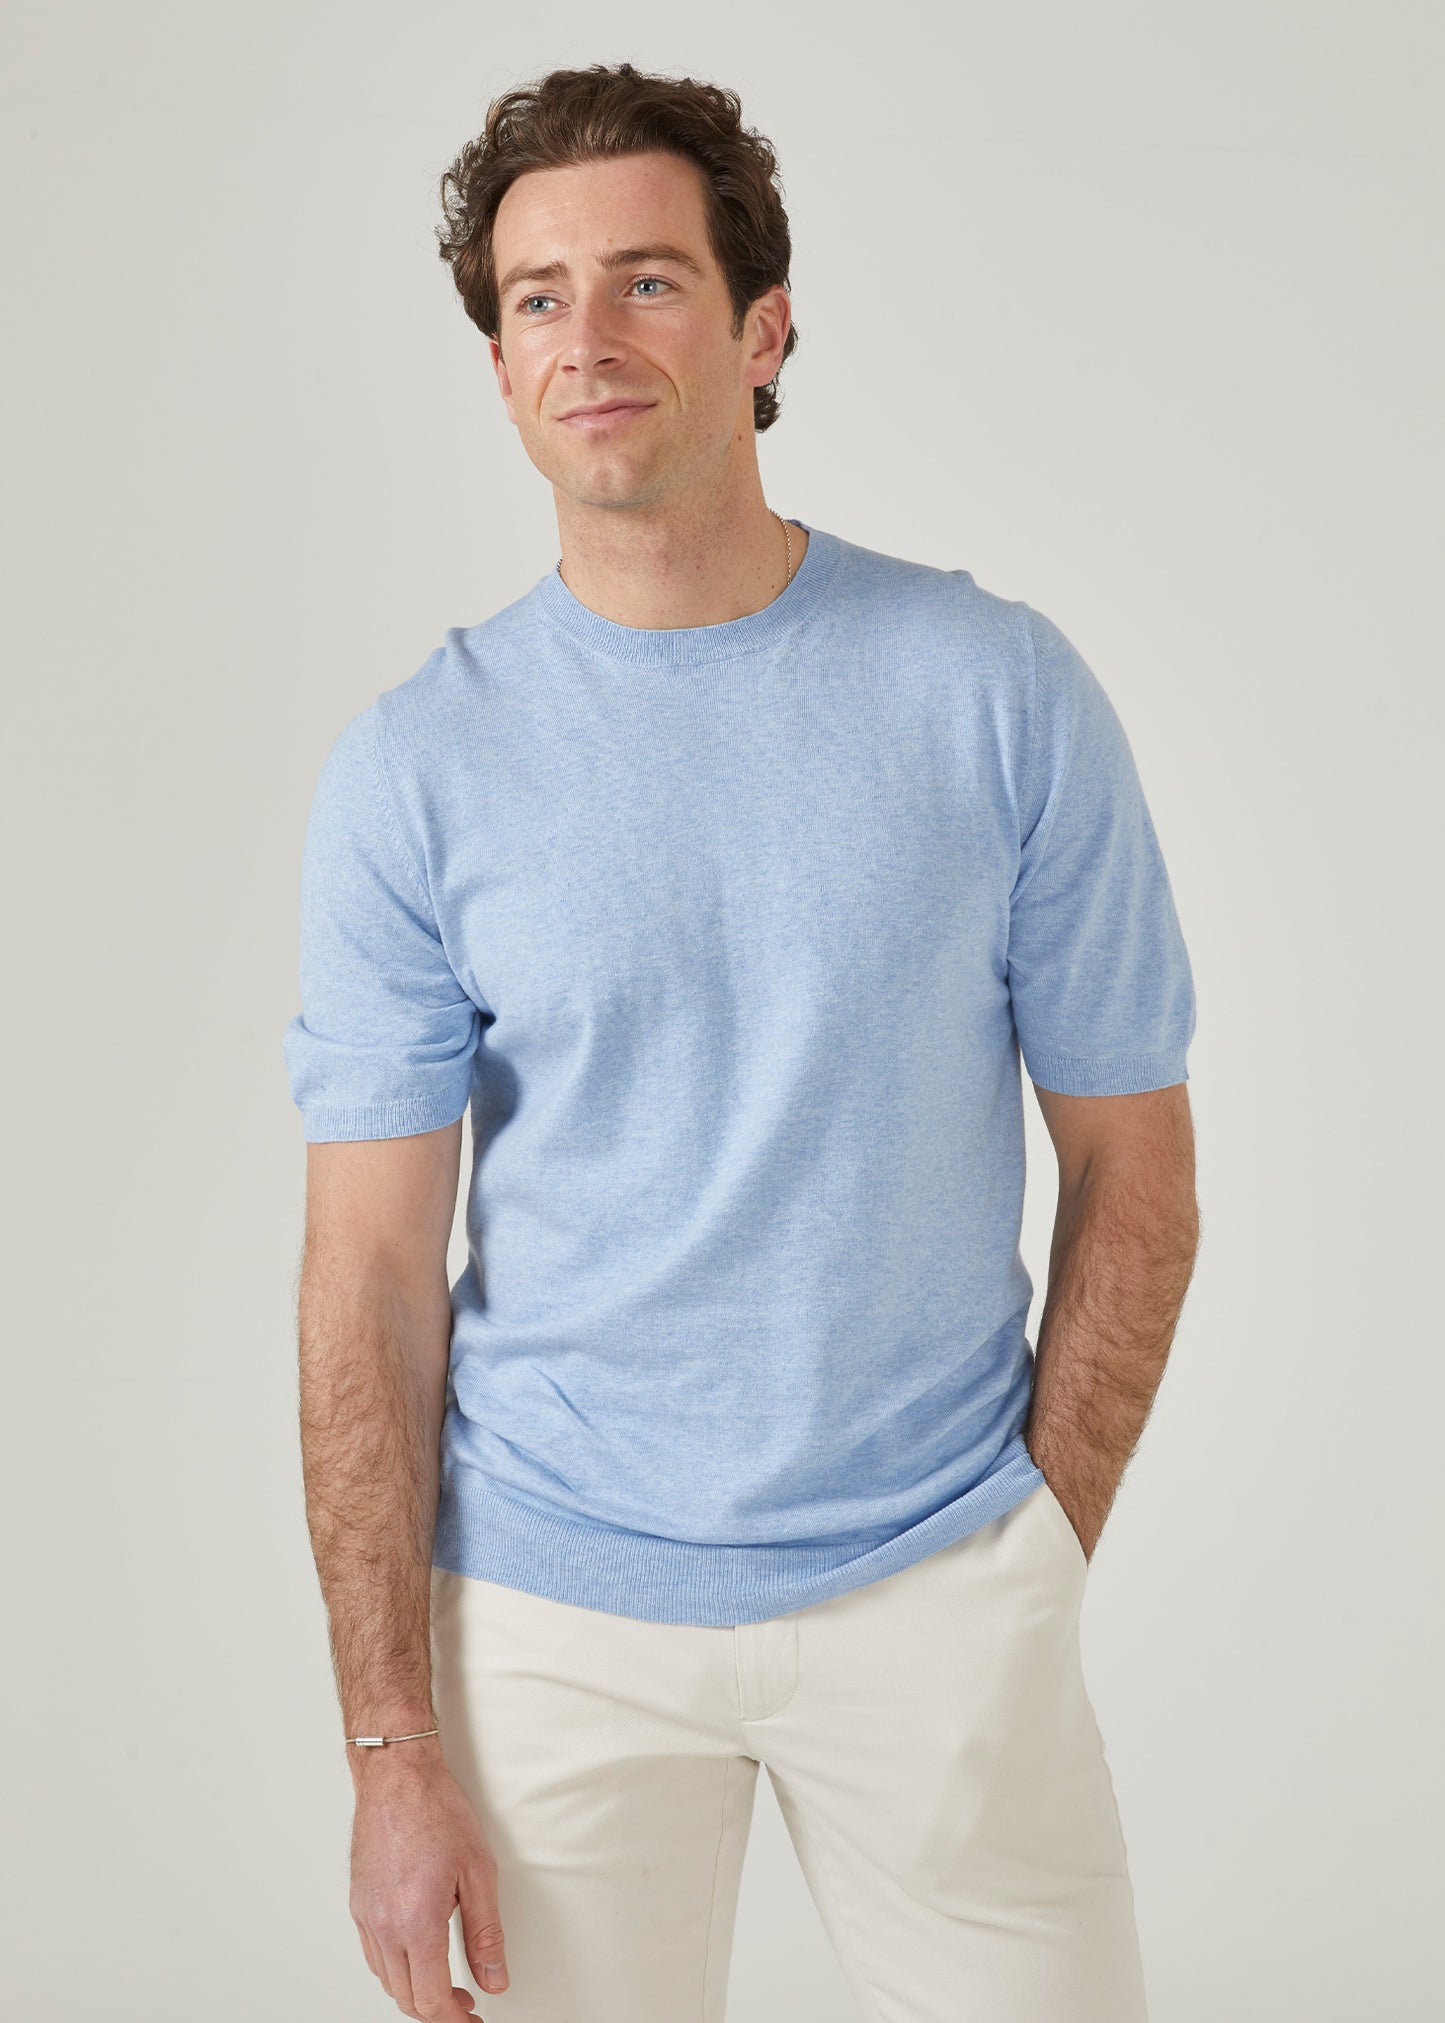 luxury cotton t-shirt with short sleeves in light blue.